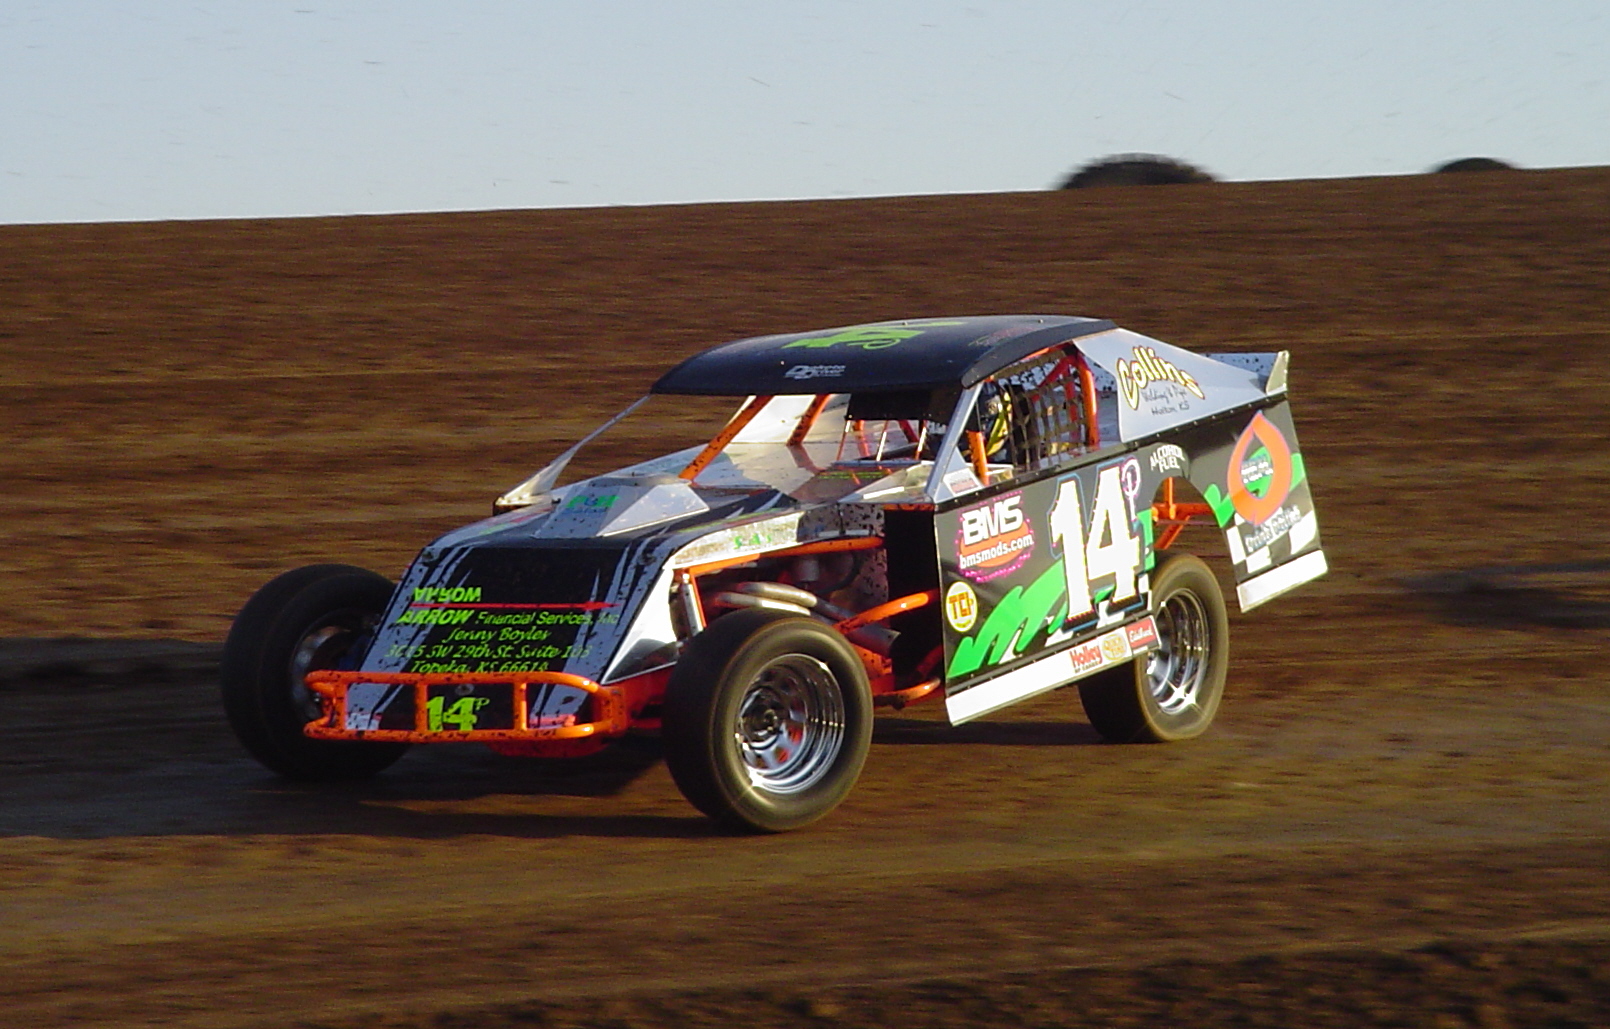 Travis Patch will continue his trek towards a USRA Casey's General Stores Weekly Racing Series track and/or national championship in the USRA Modifieds this weekend at Thunderhill Speedway. Patch leads the track points and is fourth in the national standings. (Debra Force Photo)